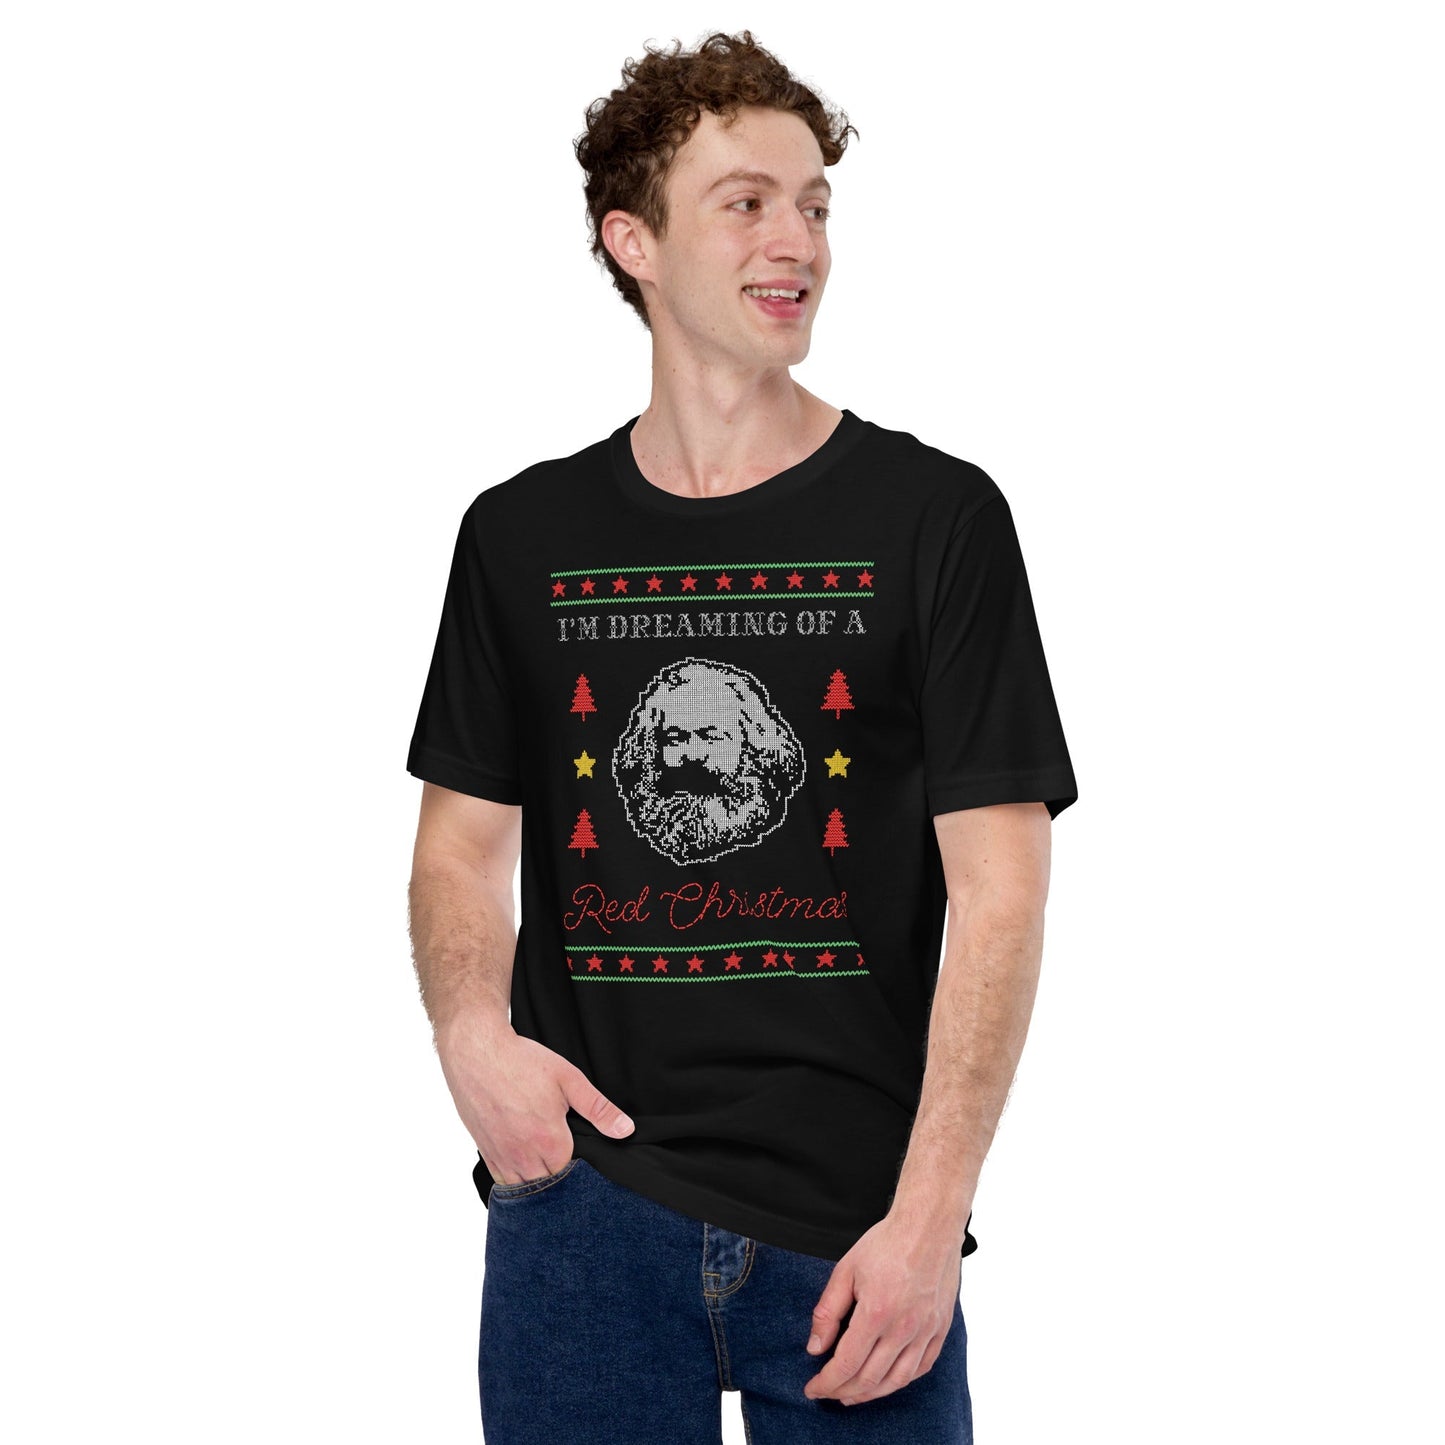 Marx: I’m dreaming of a red Christmas - Basic T-Shirt